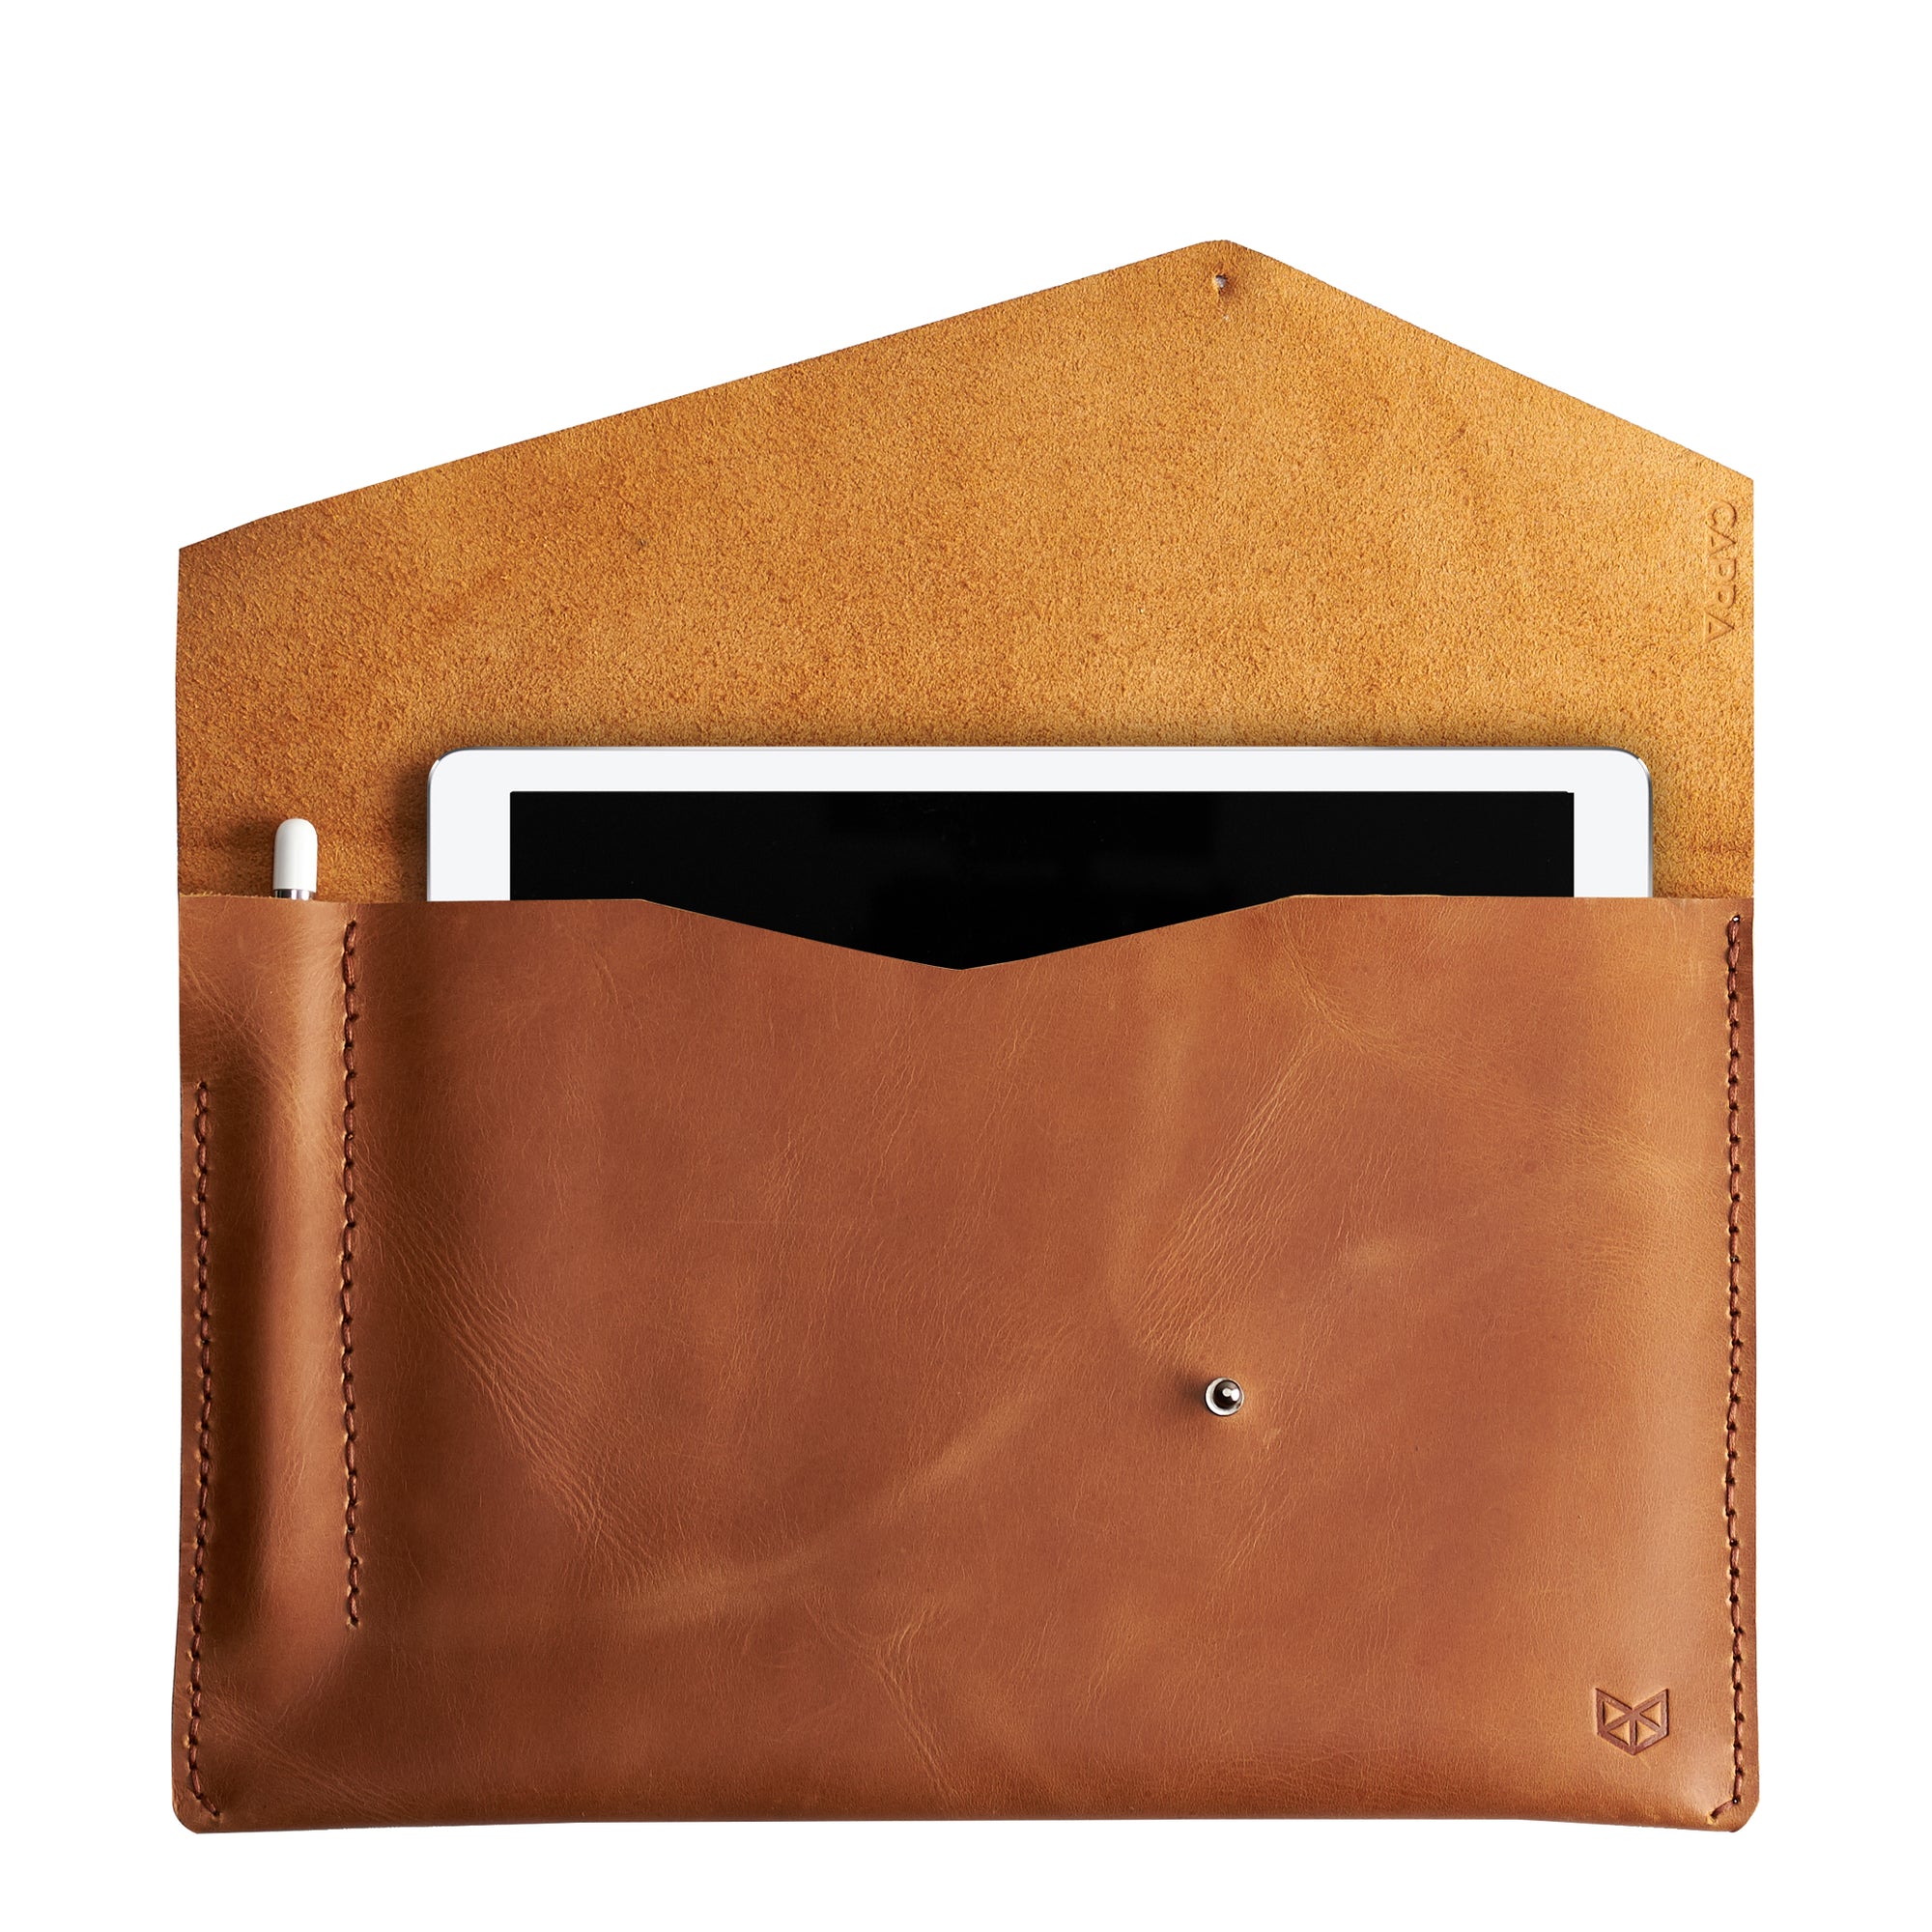 Light brown leather sleeve for iPad pro. Case for iPad Pro 10.5 inch 12.9 inch. Mens gifts